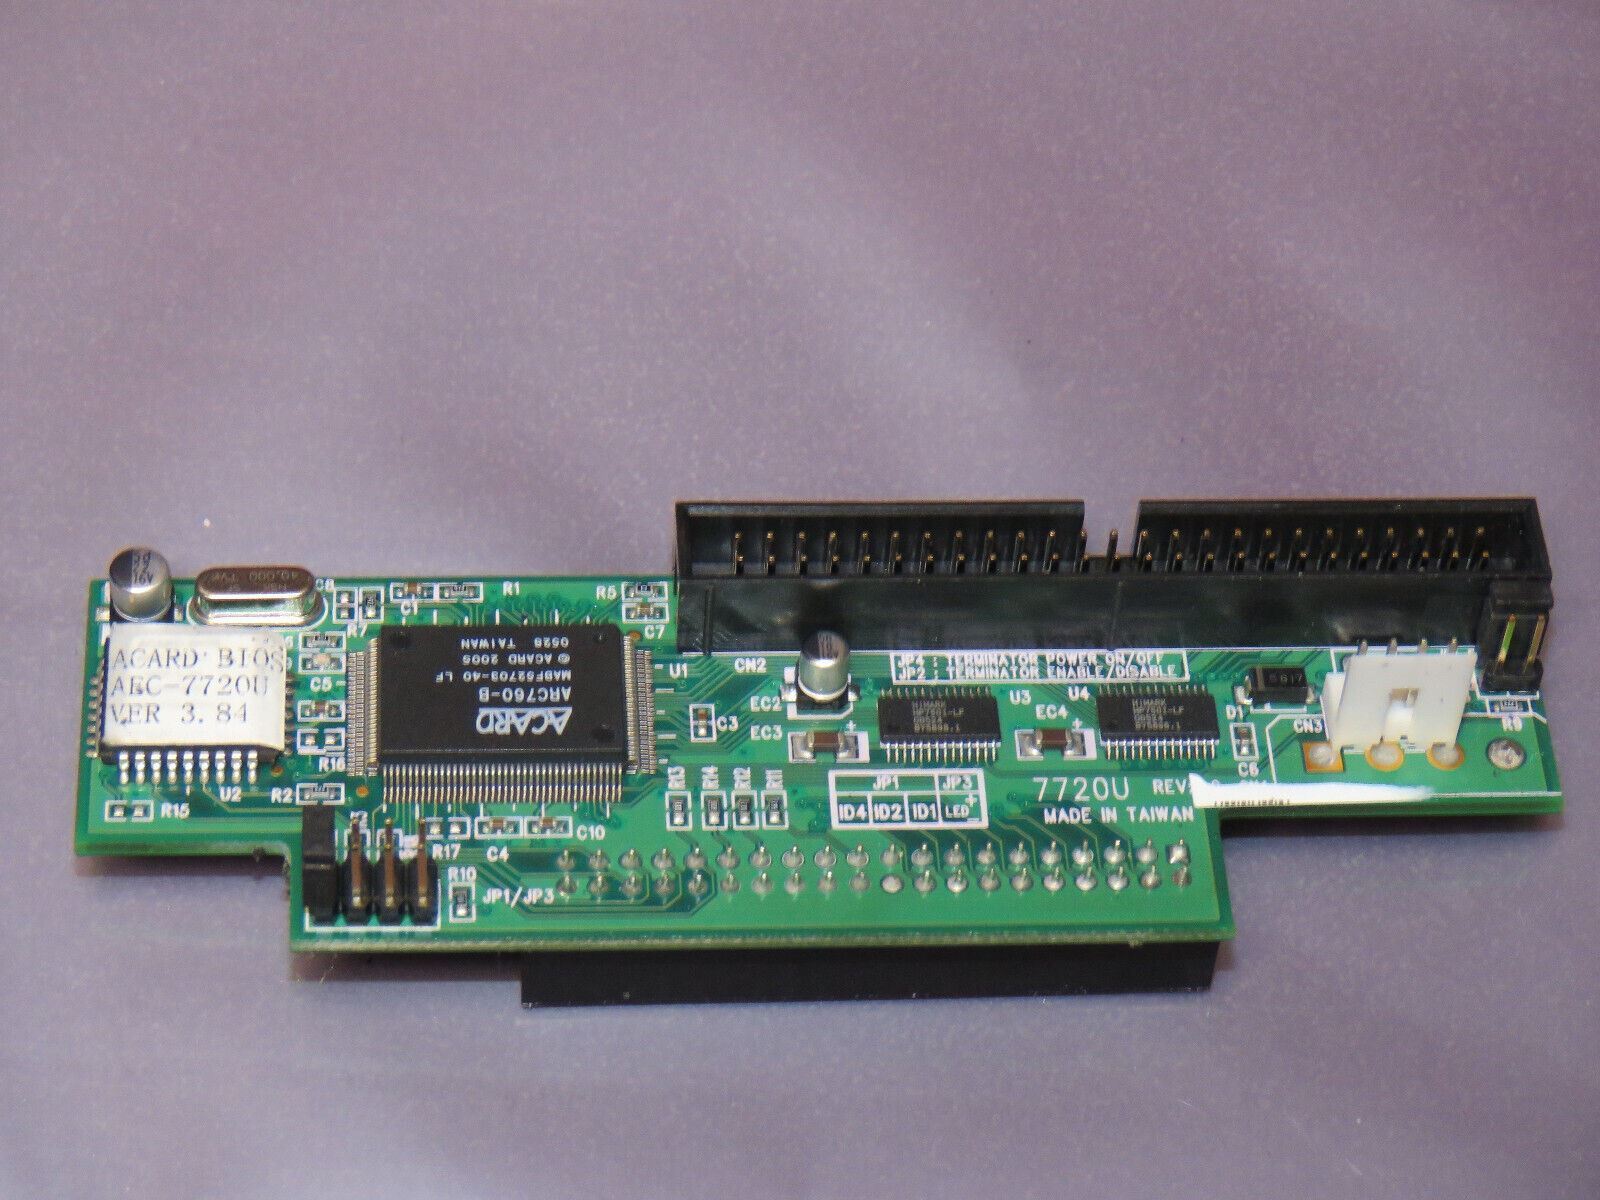 ACARD AEC-7720U SCSI to IDE ADAPTER with Warranty